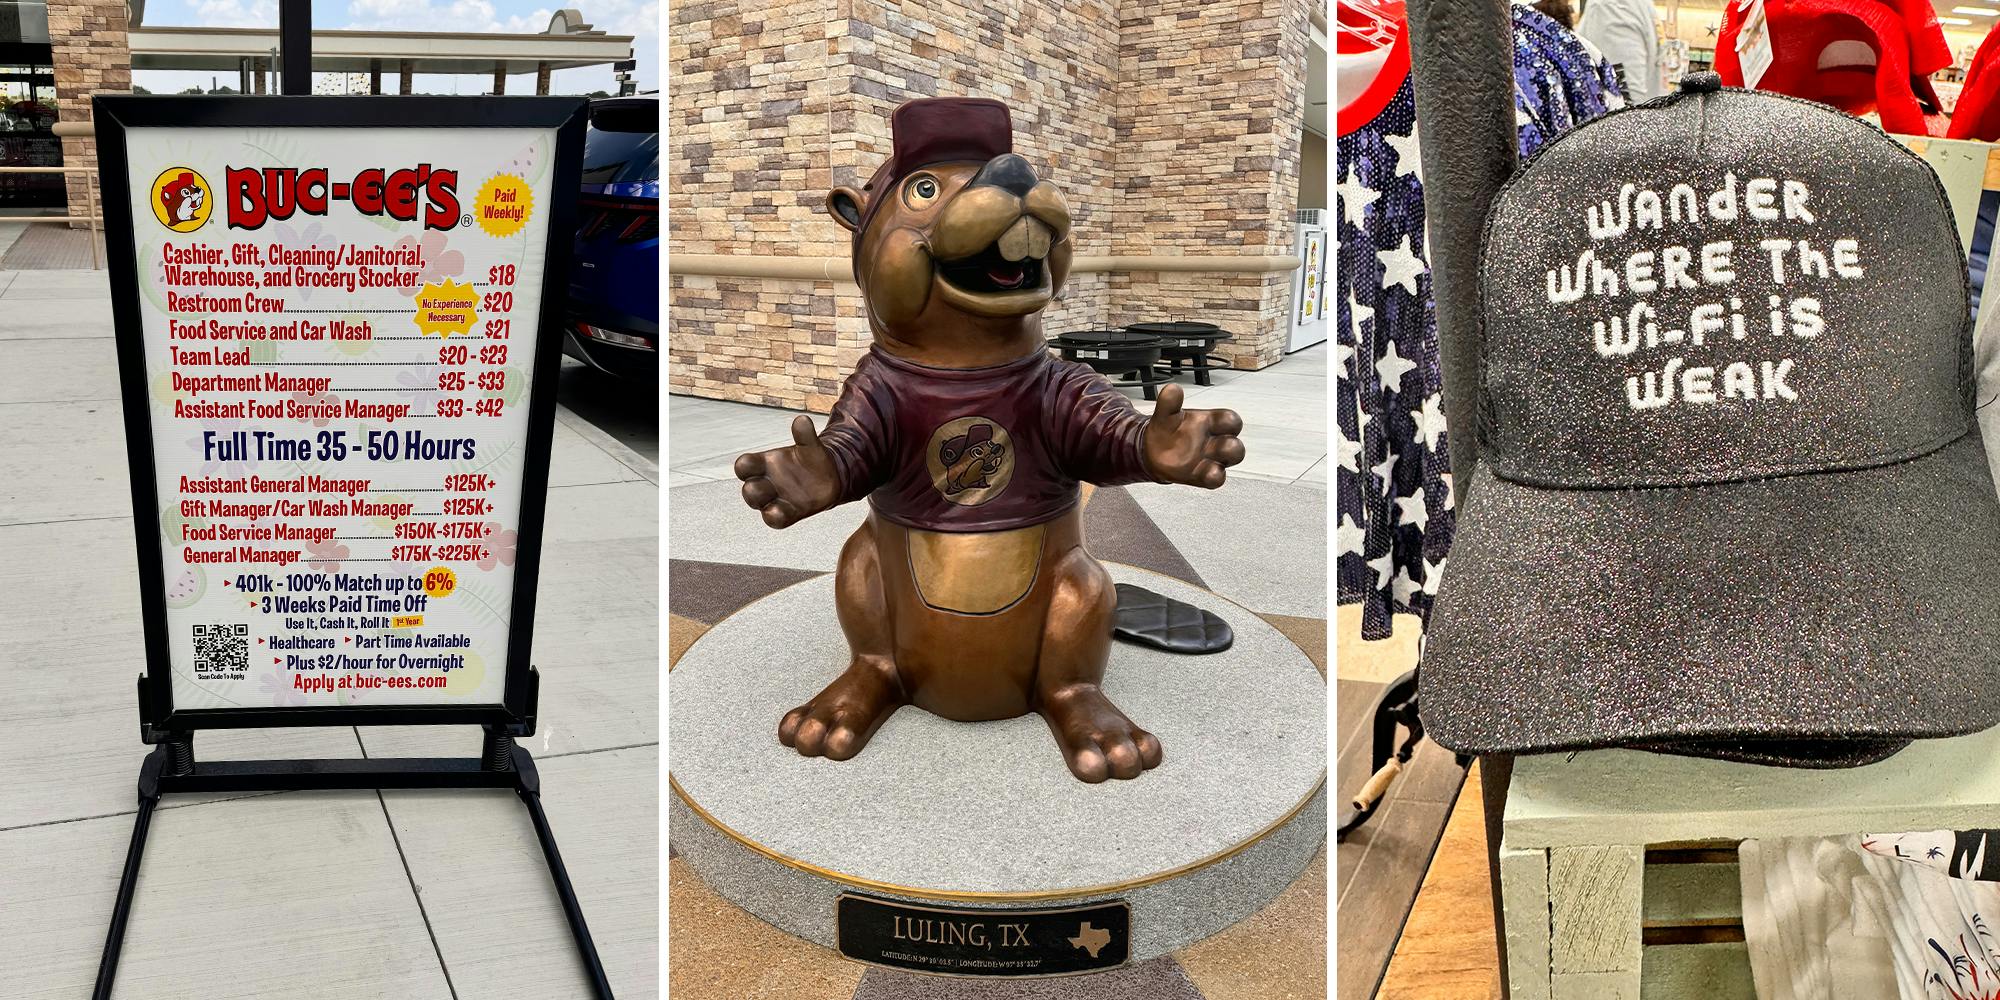 ‘We’re not bumping into customers as much’: The world’s largest Buc-ee’s just opened in Texas. There’s just one problem